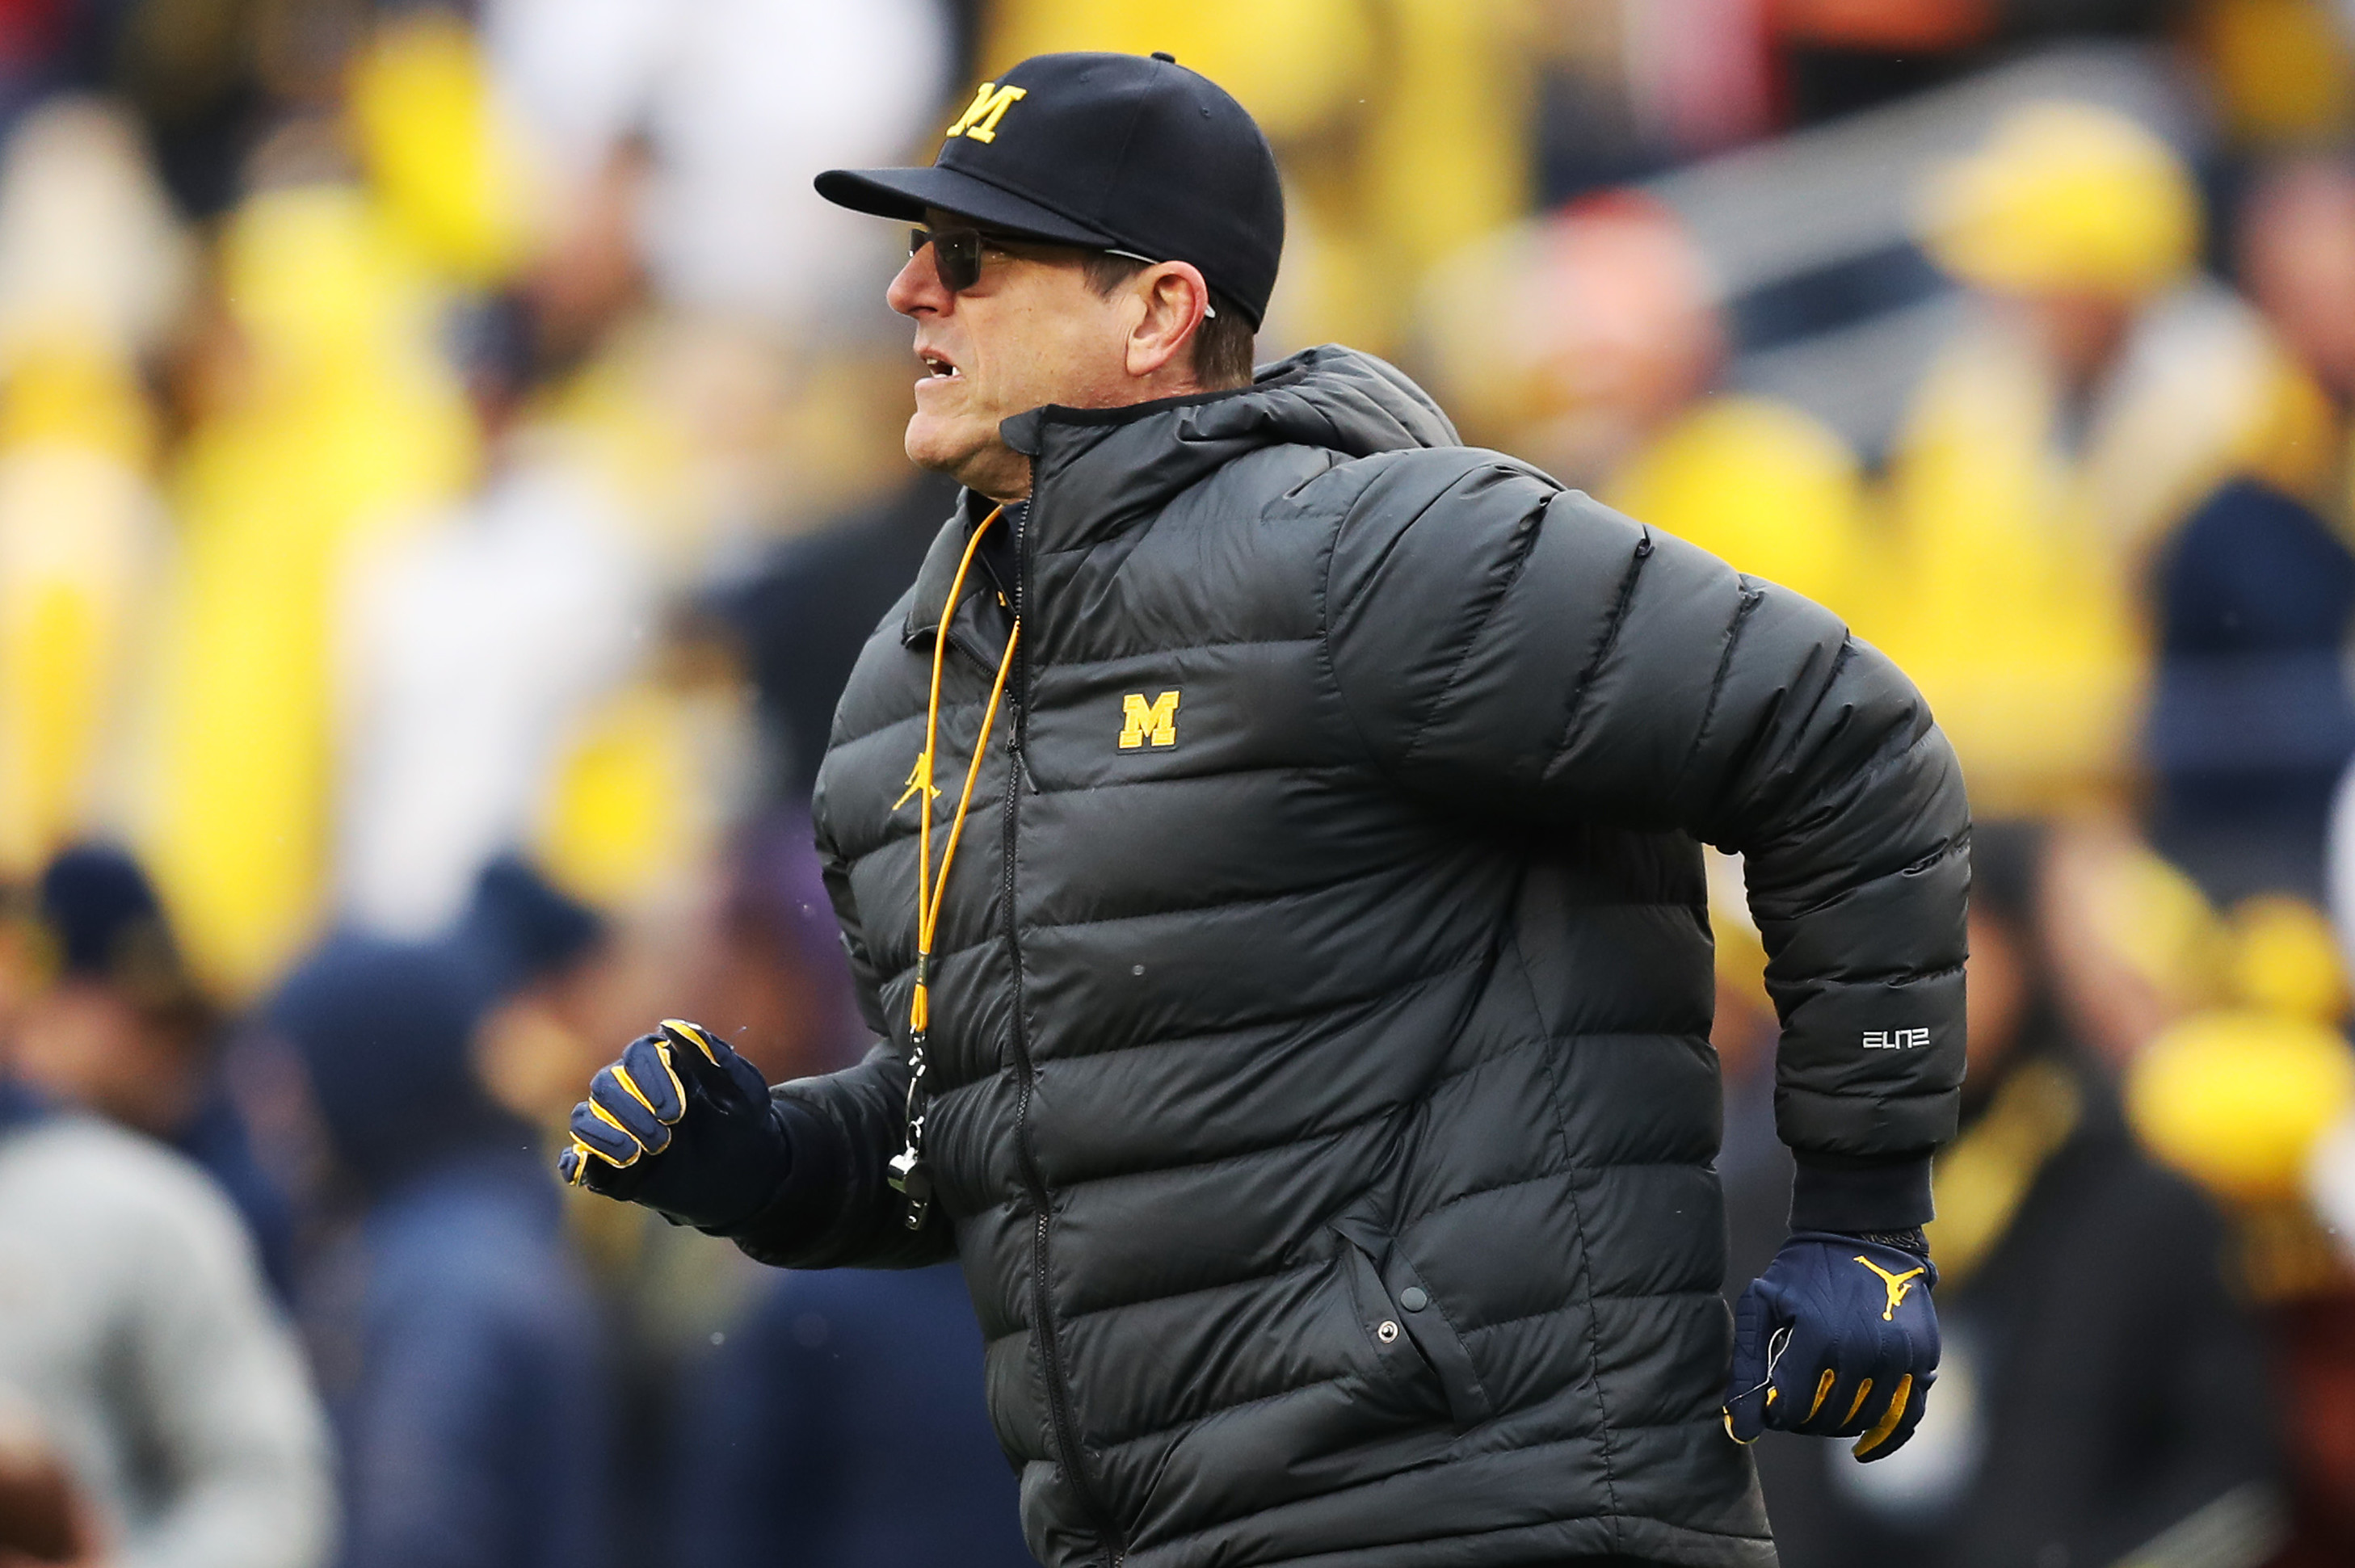 Jim Harbaugh to Donate Contract Bonuses to Michigan Dept. Impacted by COVID Pay Cuts